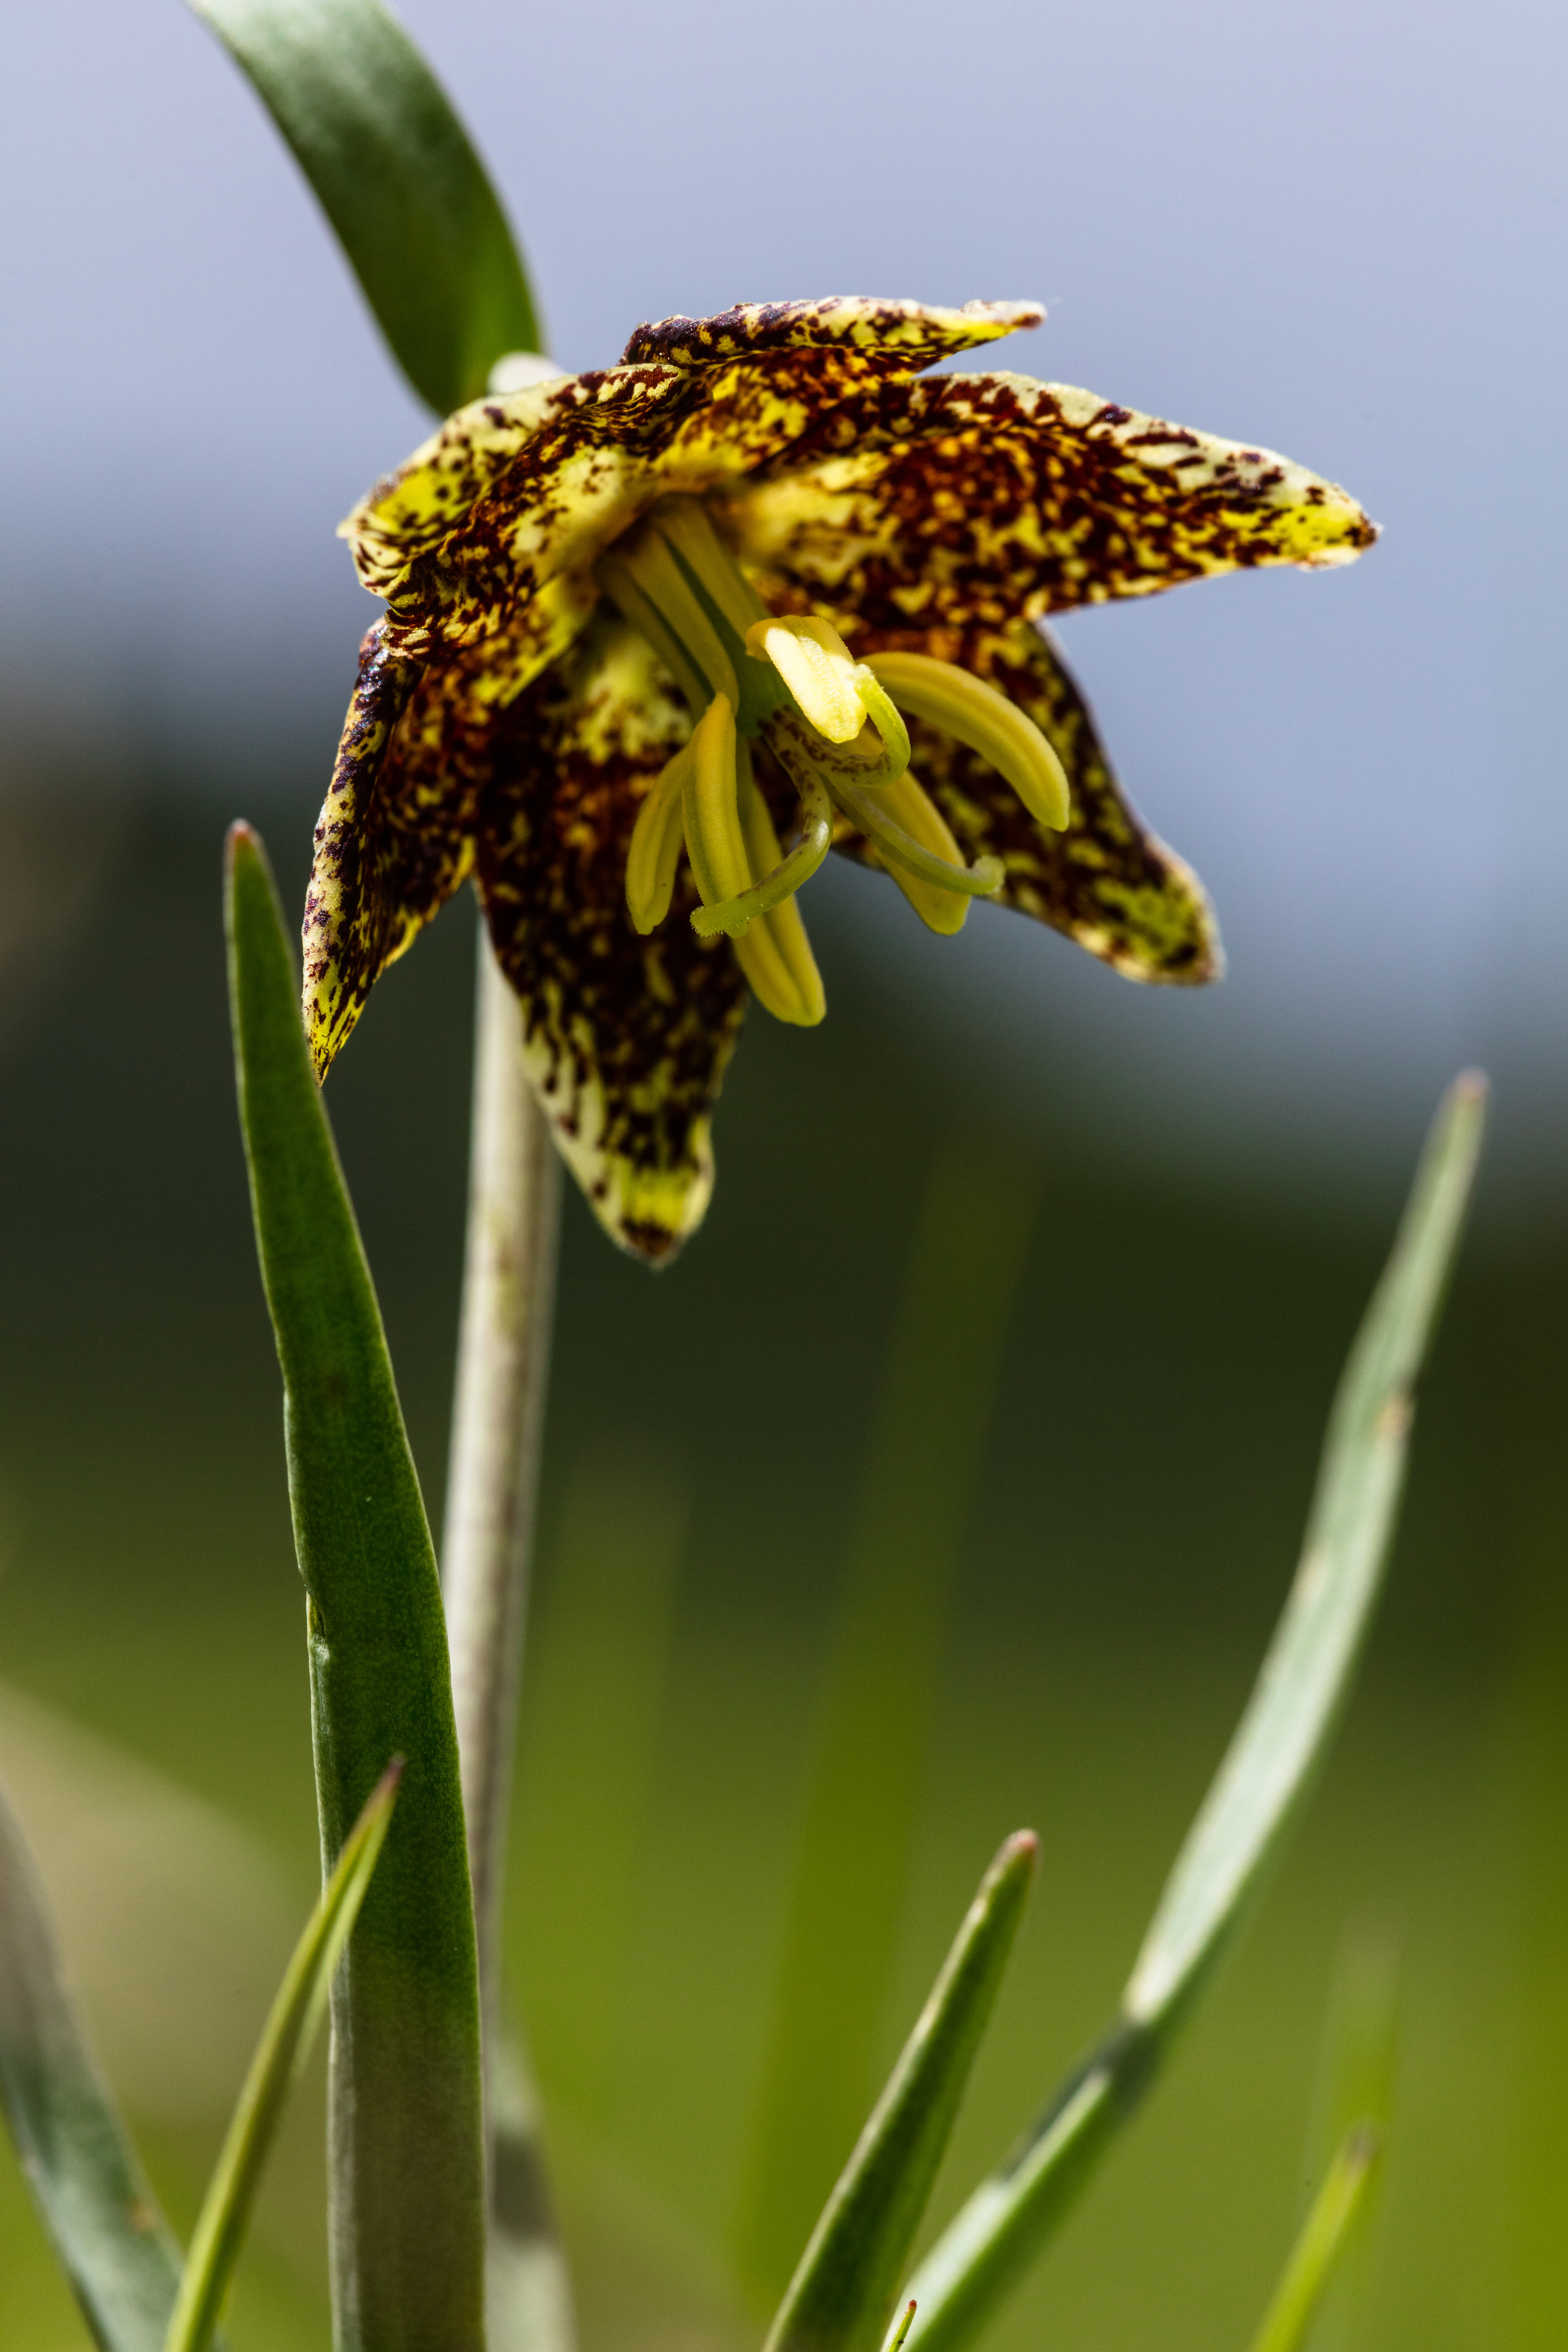 A yellow and brown spotted nodding flower